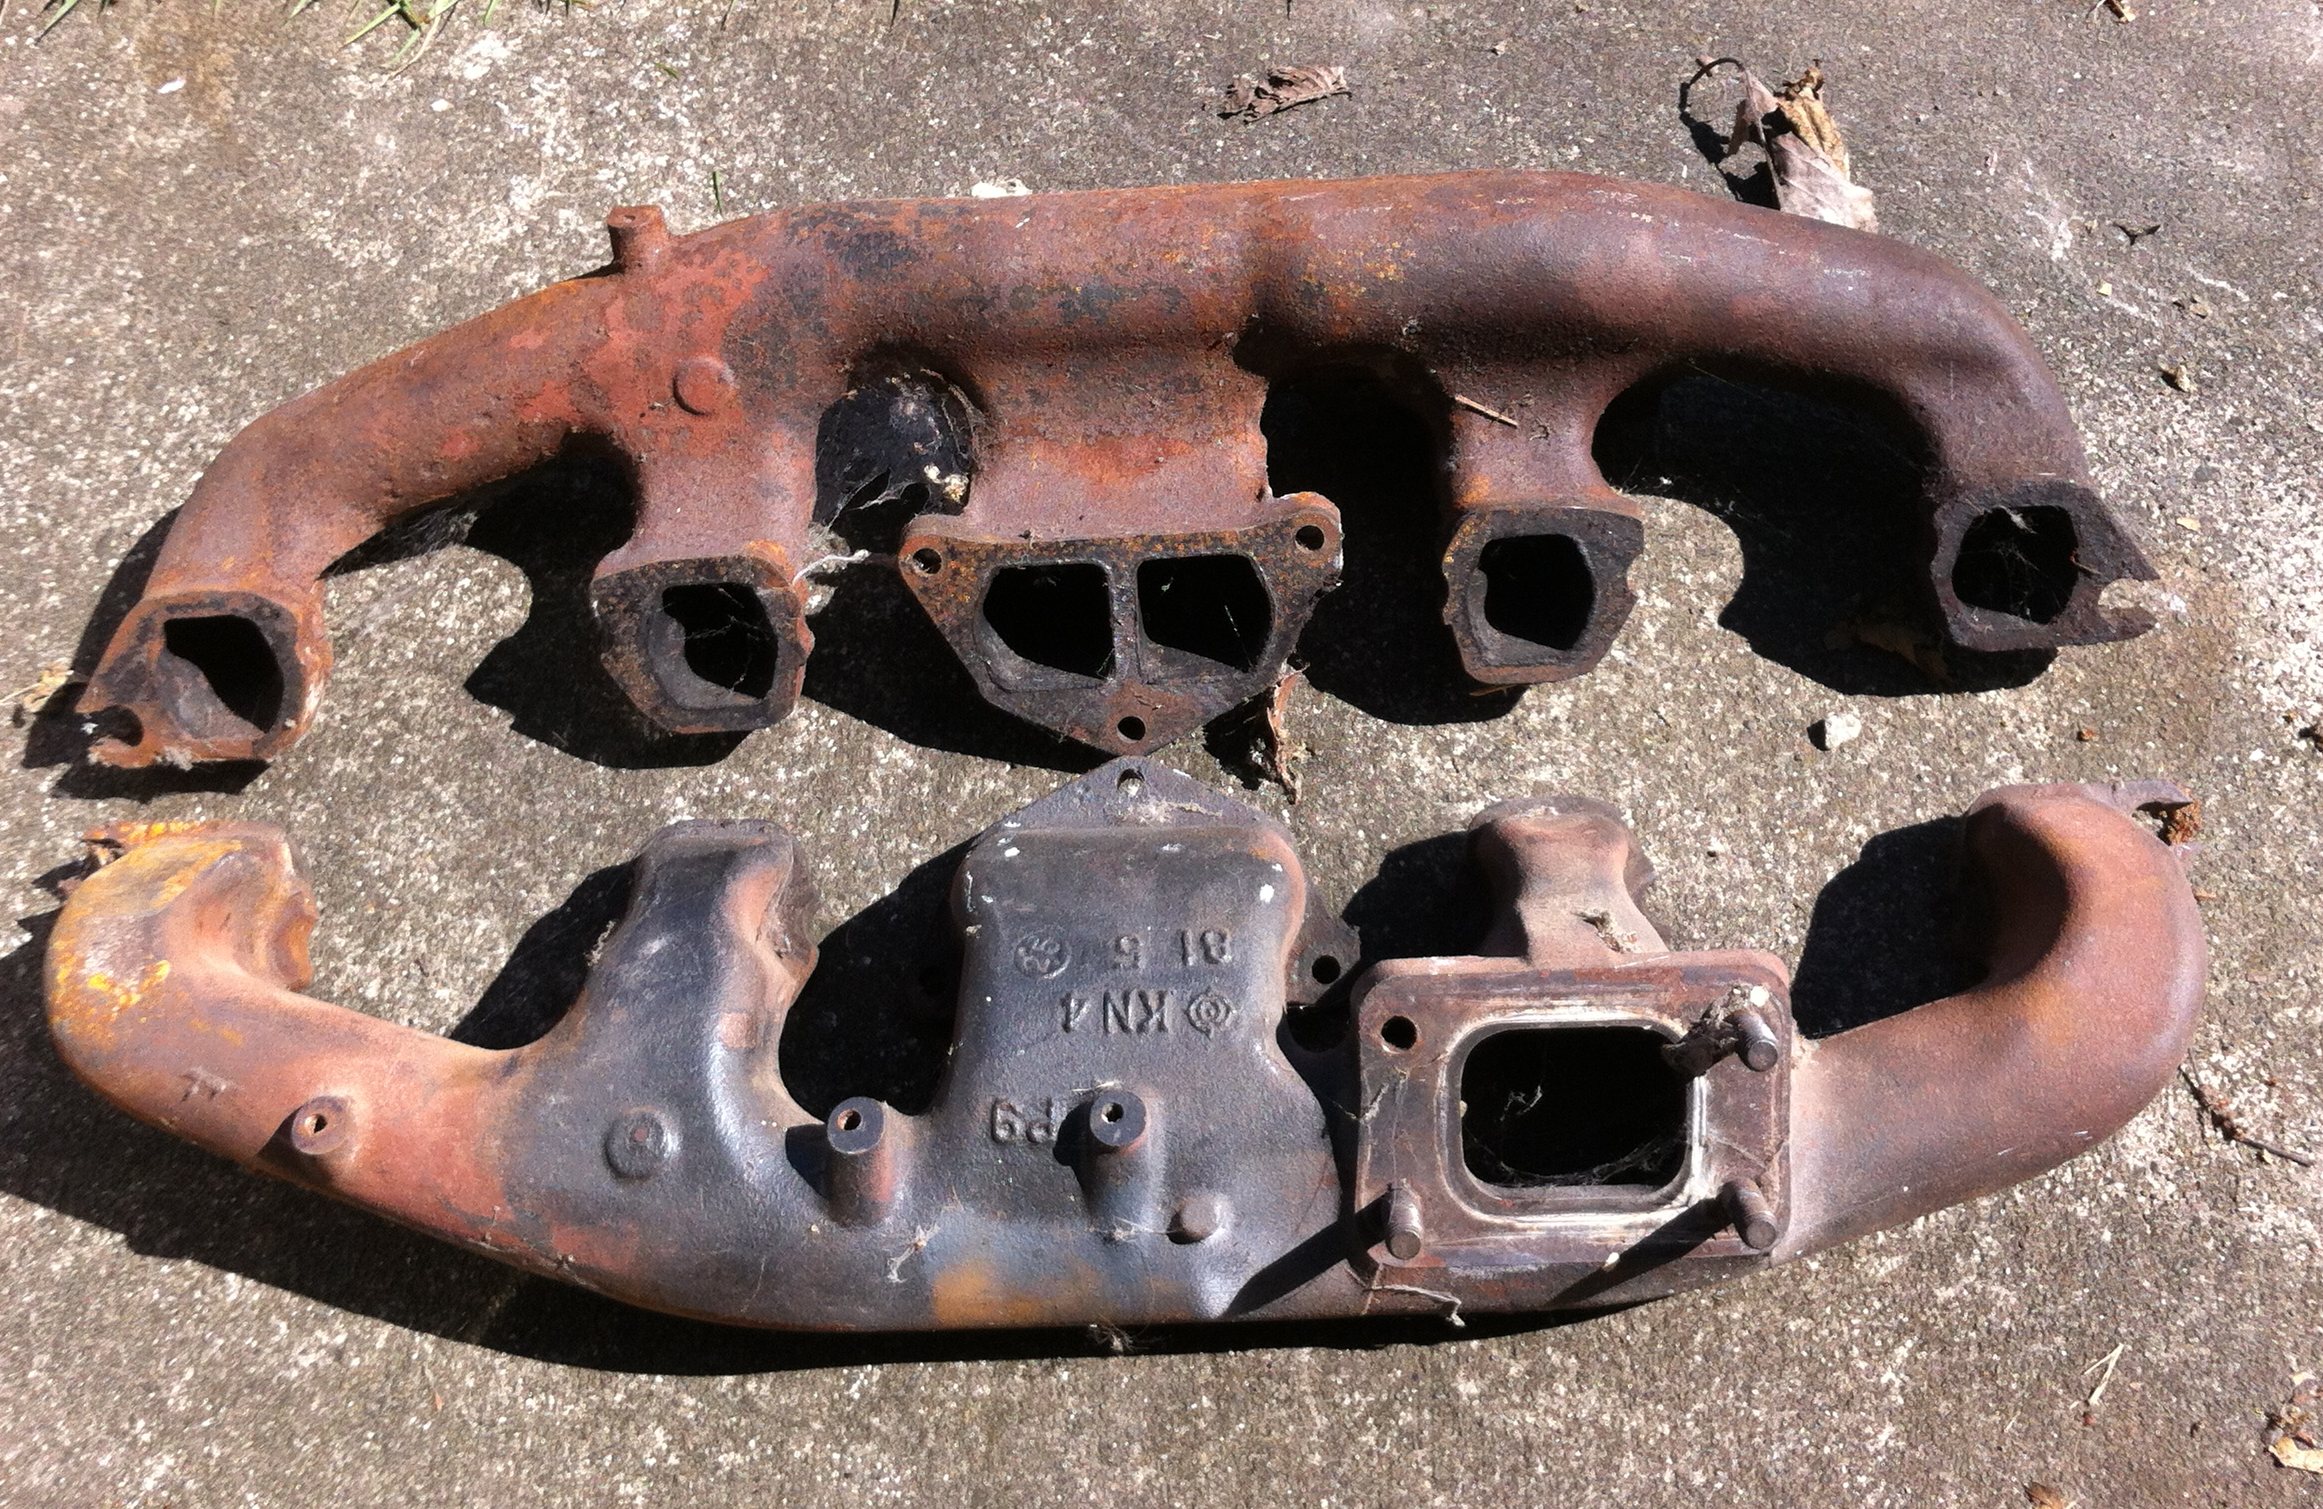 SOLD: 280ZX Turbo exhaust manifolds - NissanDiesel Forums